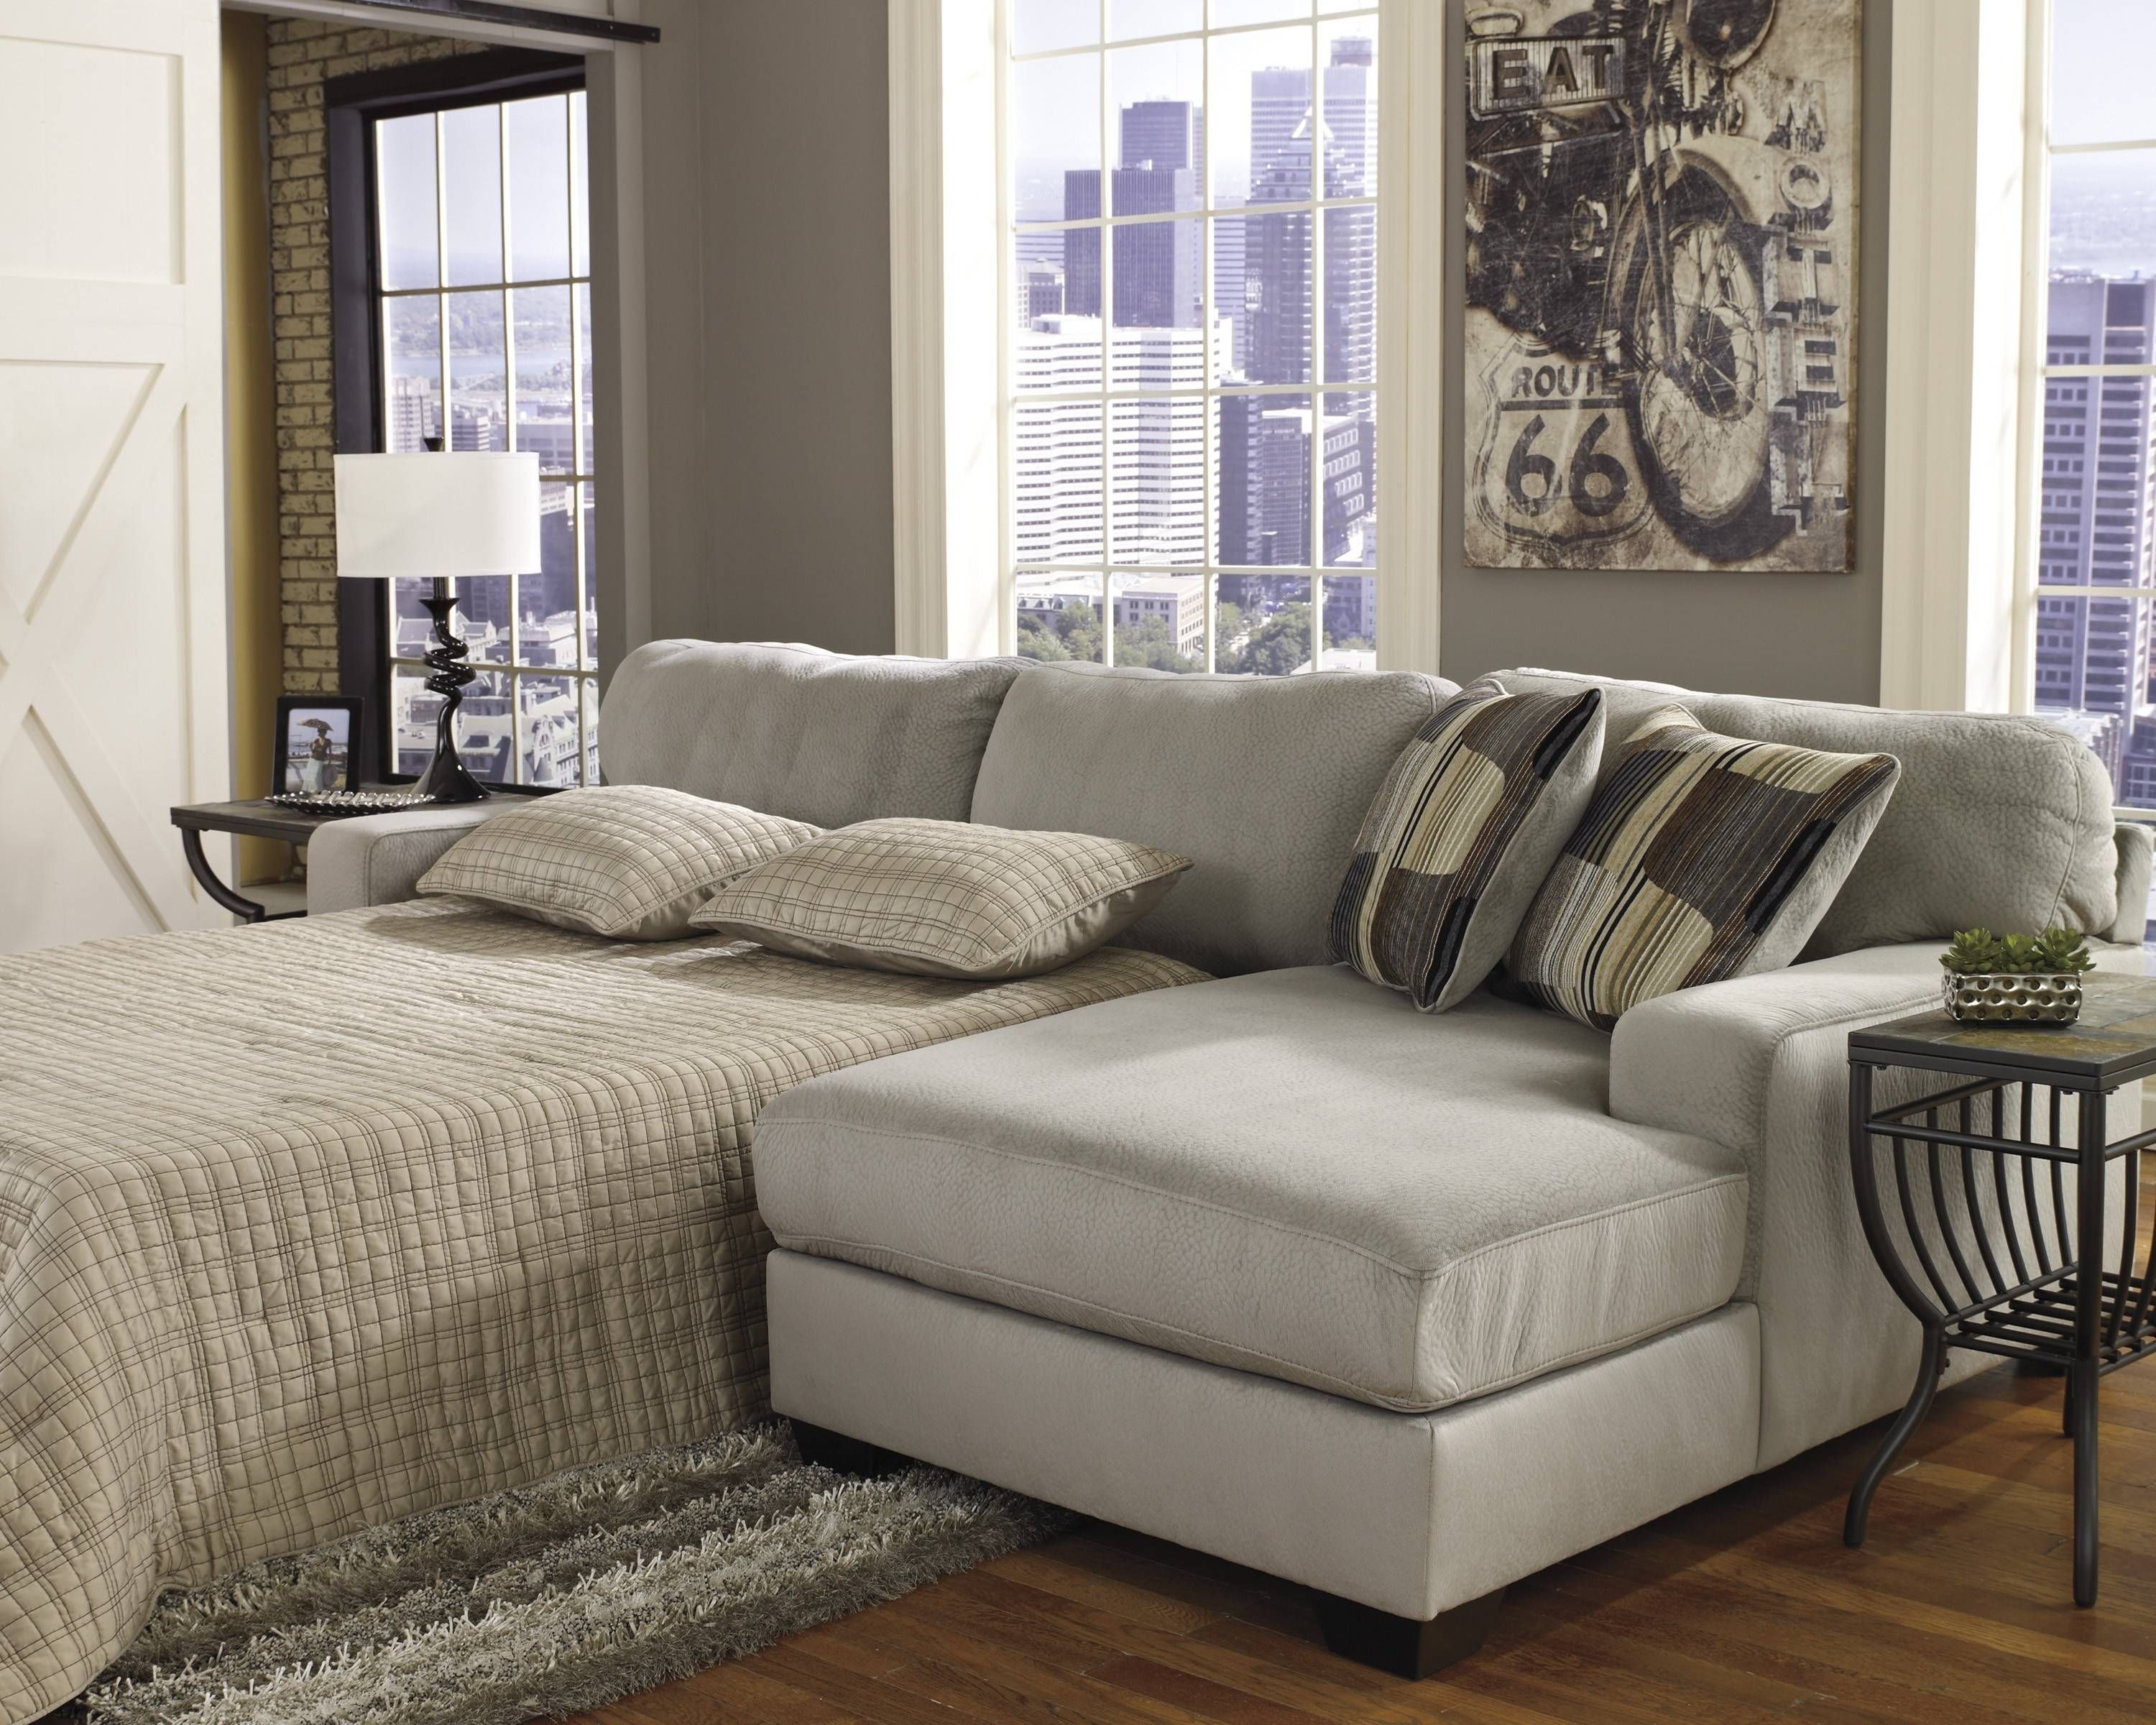 Sectional Sleeper Sofas With Chaise | Tehranmix Decoration In Sectional Sofas With Sleeper And Chaise (View 2 of 30)